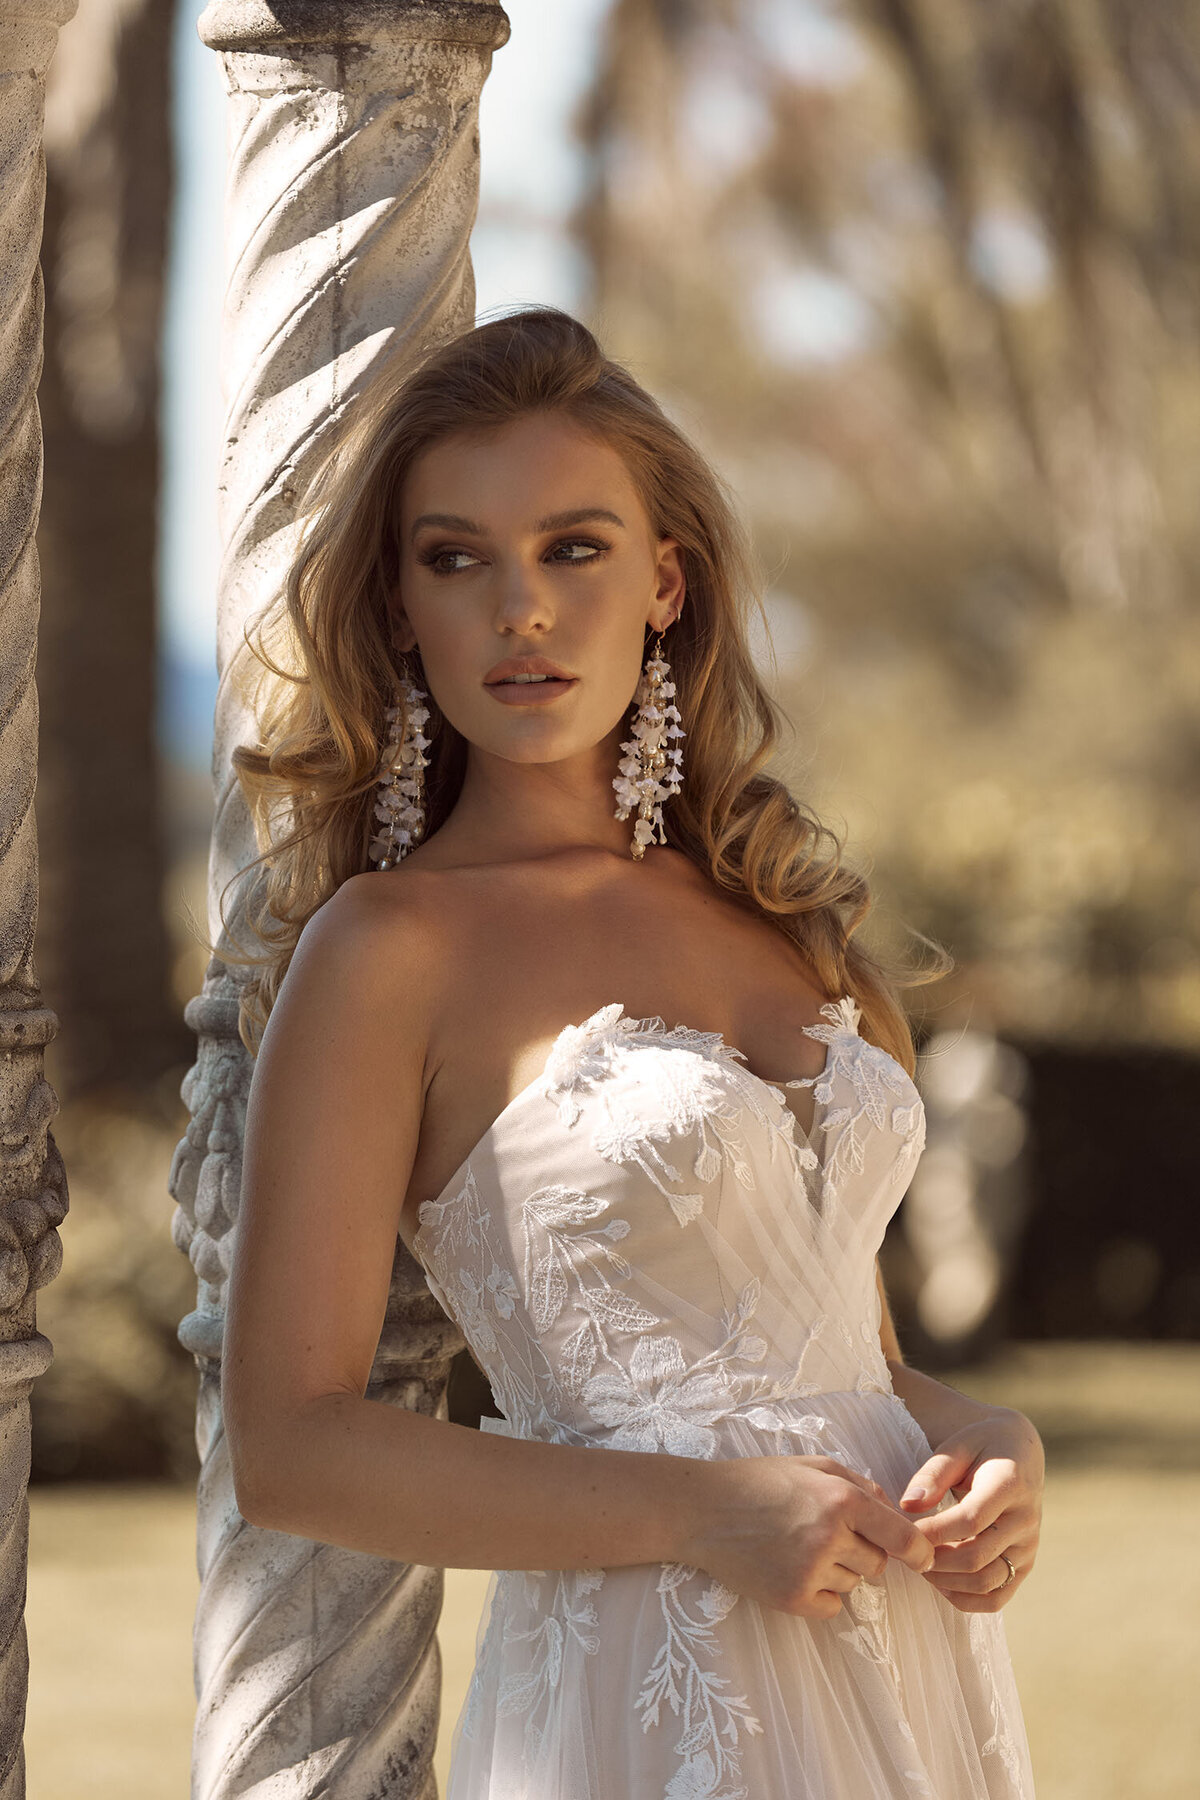 BRIELLE ML19255 FULL LENGTH A-LINE SILHOUETTE PLUNGING NECKLINE EMBROIDERED FLORAL LACE WITH DETACHABLE SHOULDER STRAPS AND TULLE CROSS OVER STRAPS FINISH WEDDING DRESS MADI LANE BRIDAL 6